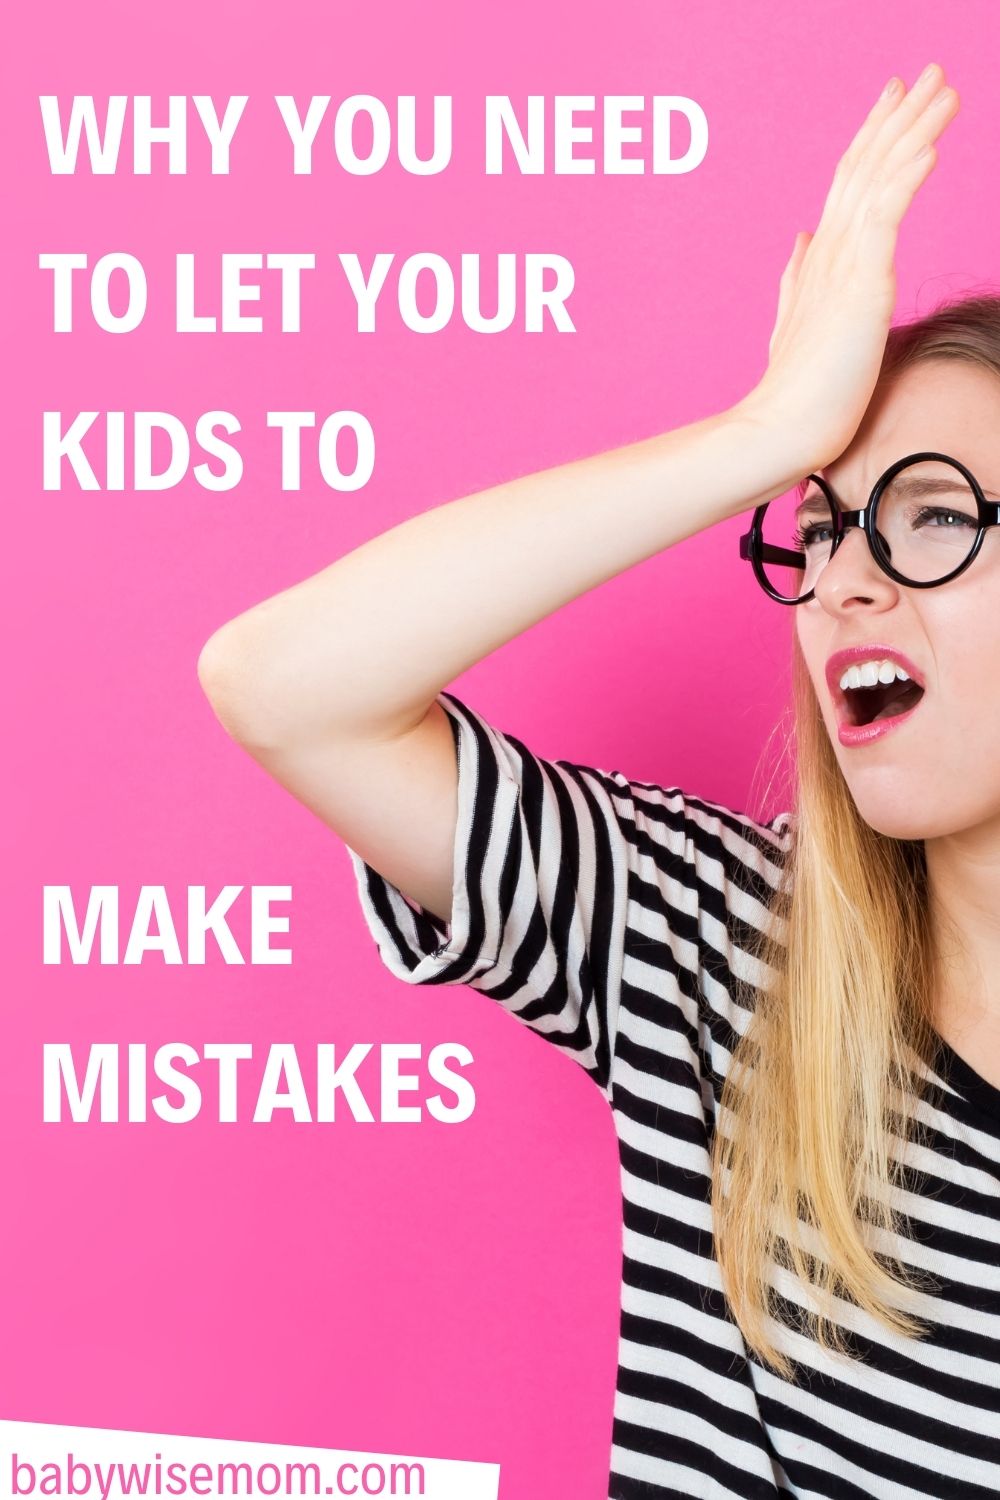 Give Kids Permission to Make Mistakes